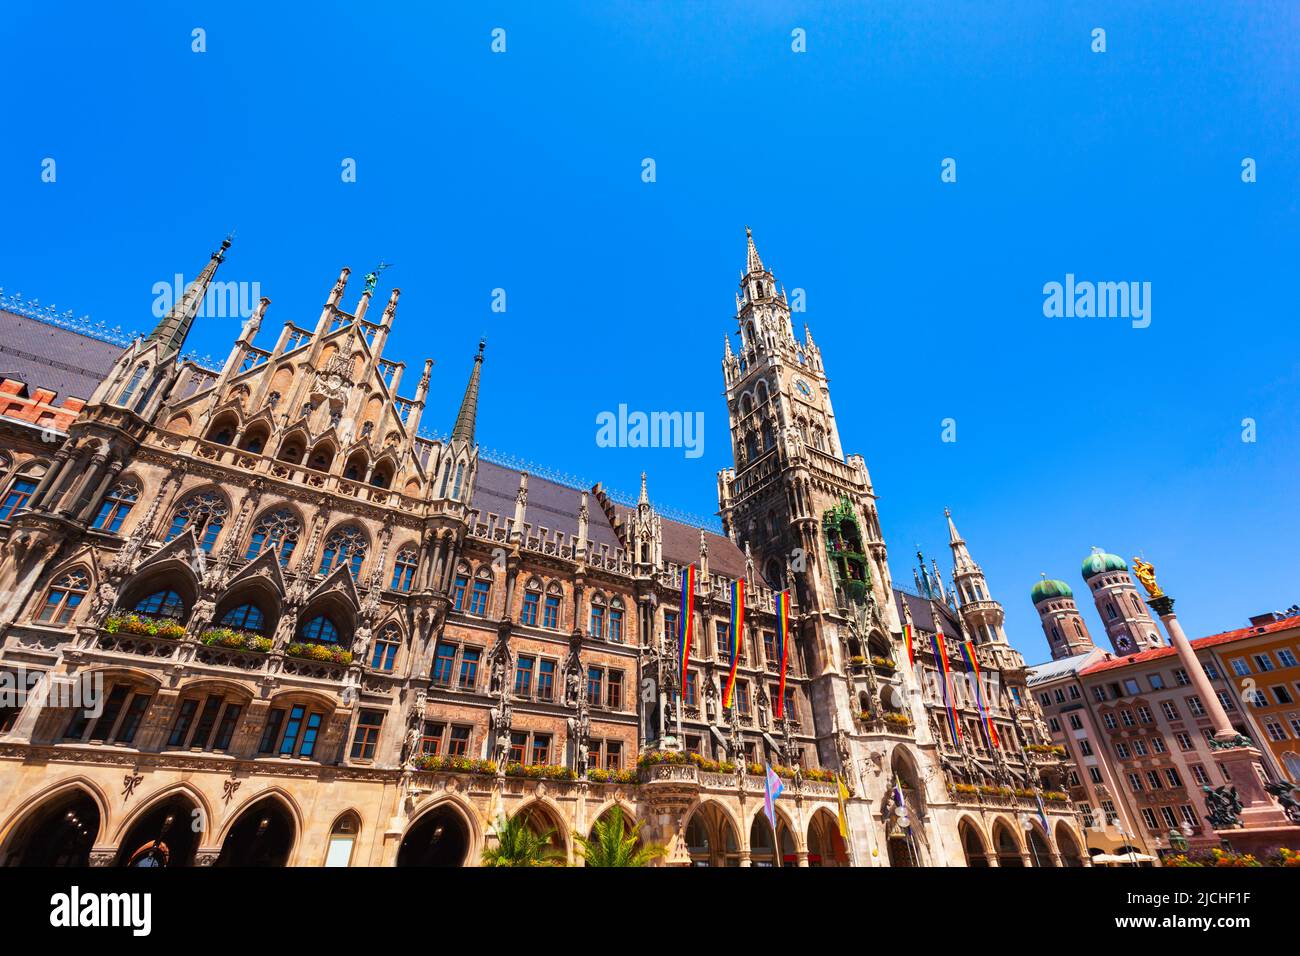 New Town Hall or Neues Rathaus is located at the Marienplatz or St. Mary square, a central square in Munich city centre, Germany Stock Photo